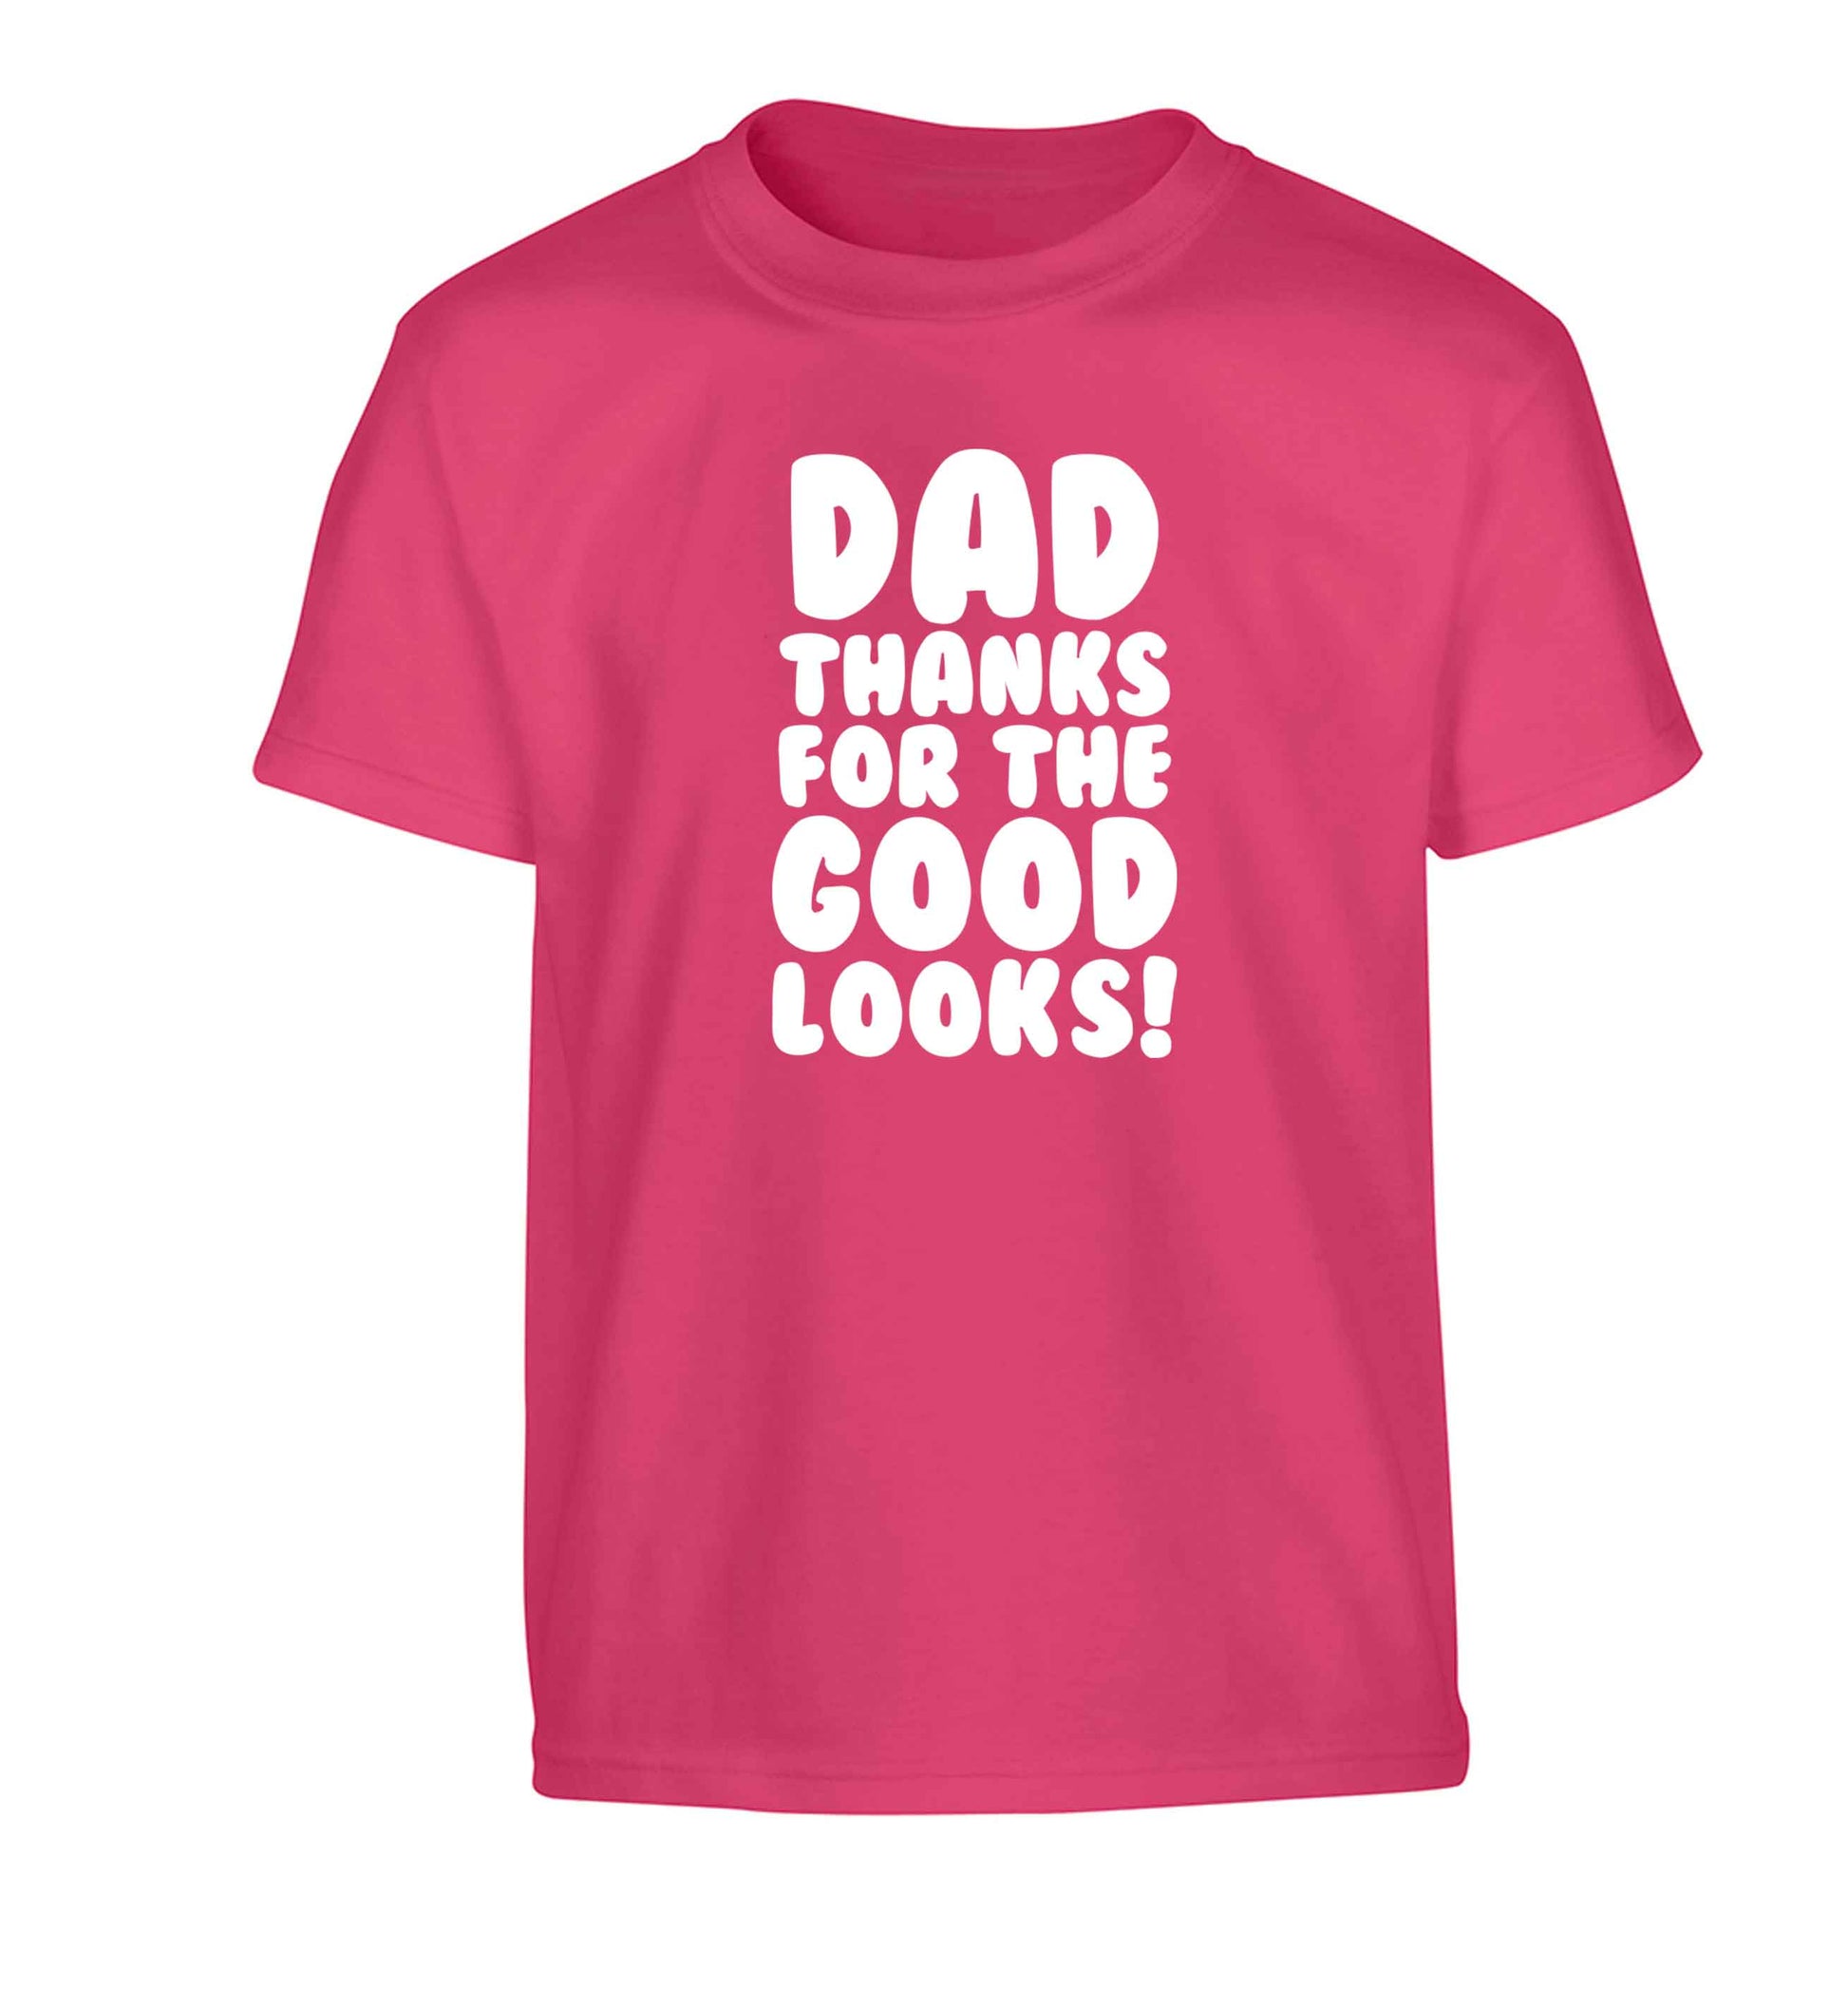 Dad thanks for the good looks Children's pink Tshirt 12-13 Years